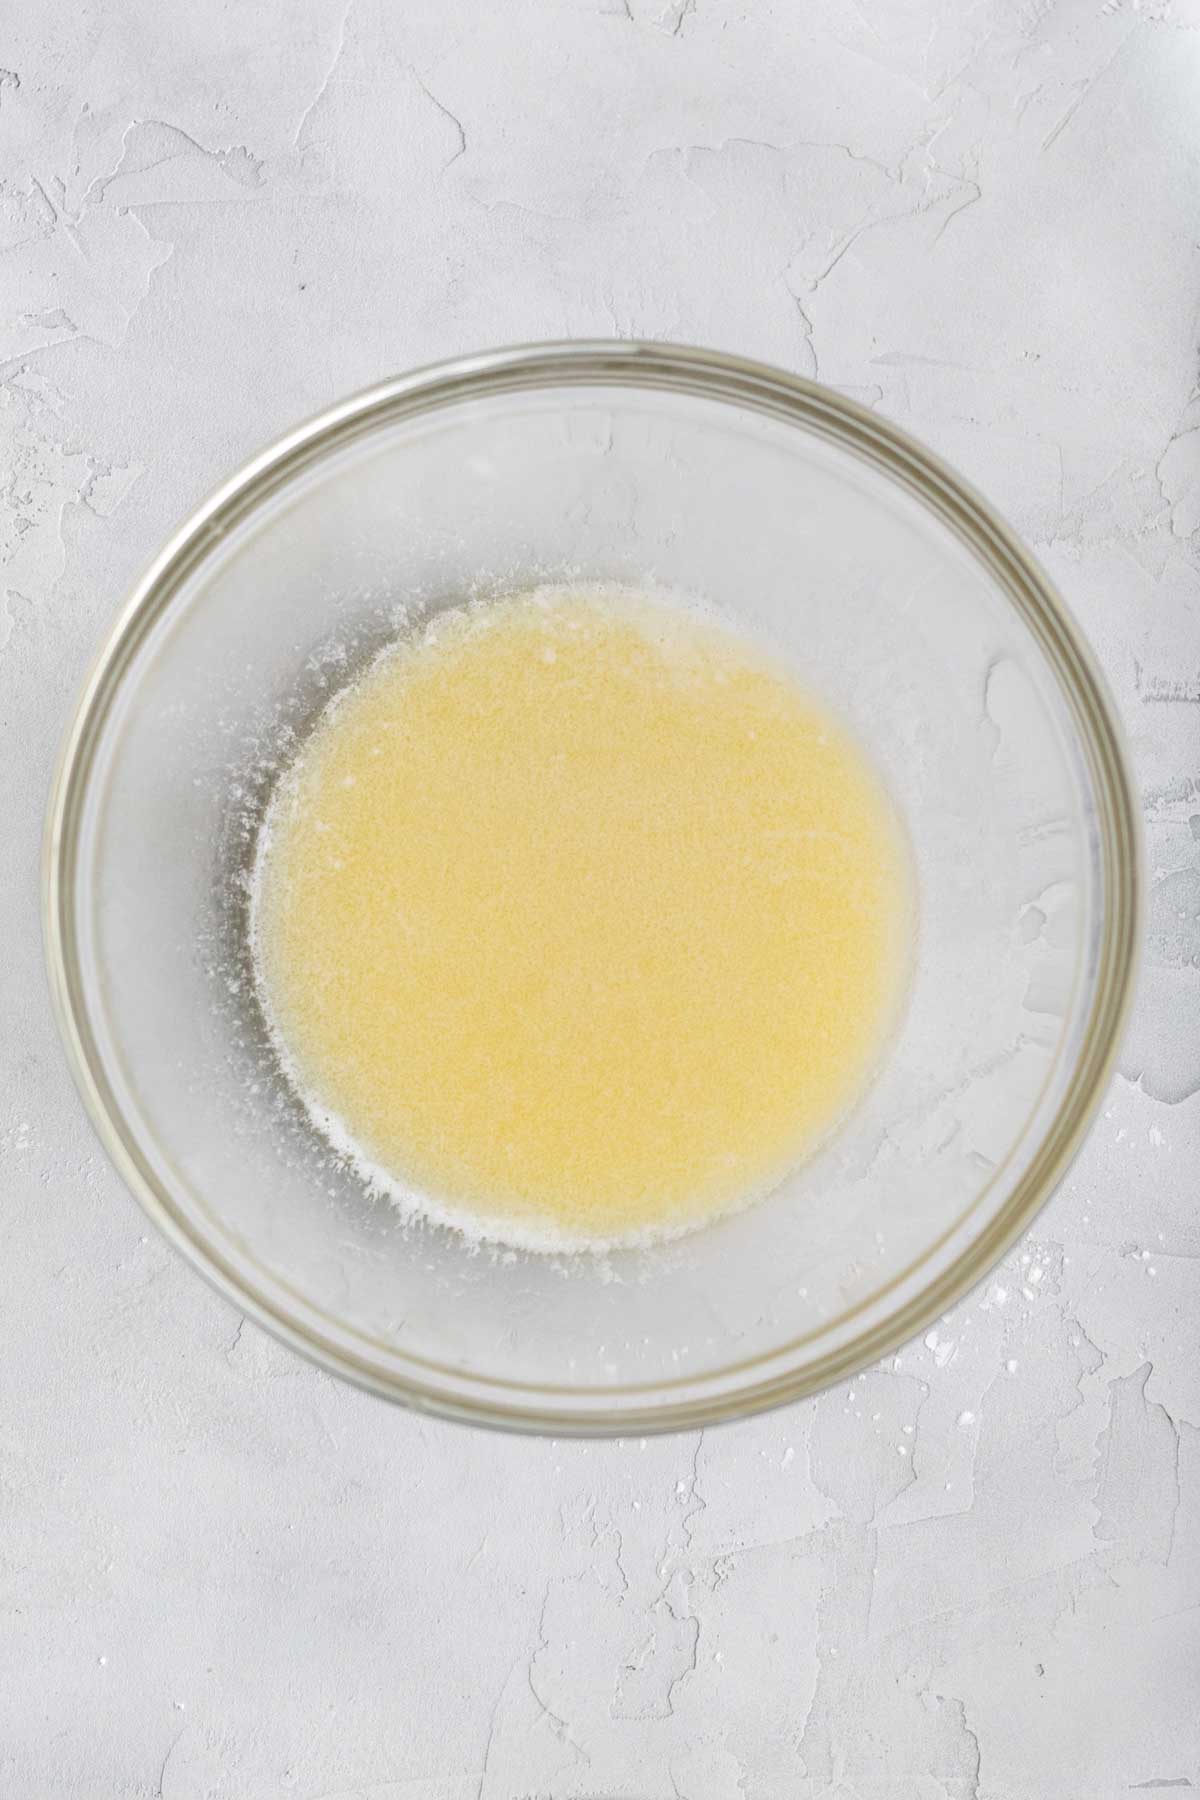 Melted butter, salt and vanilla in a glass bowl.